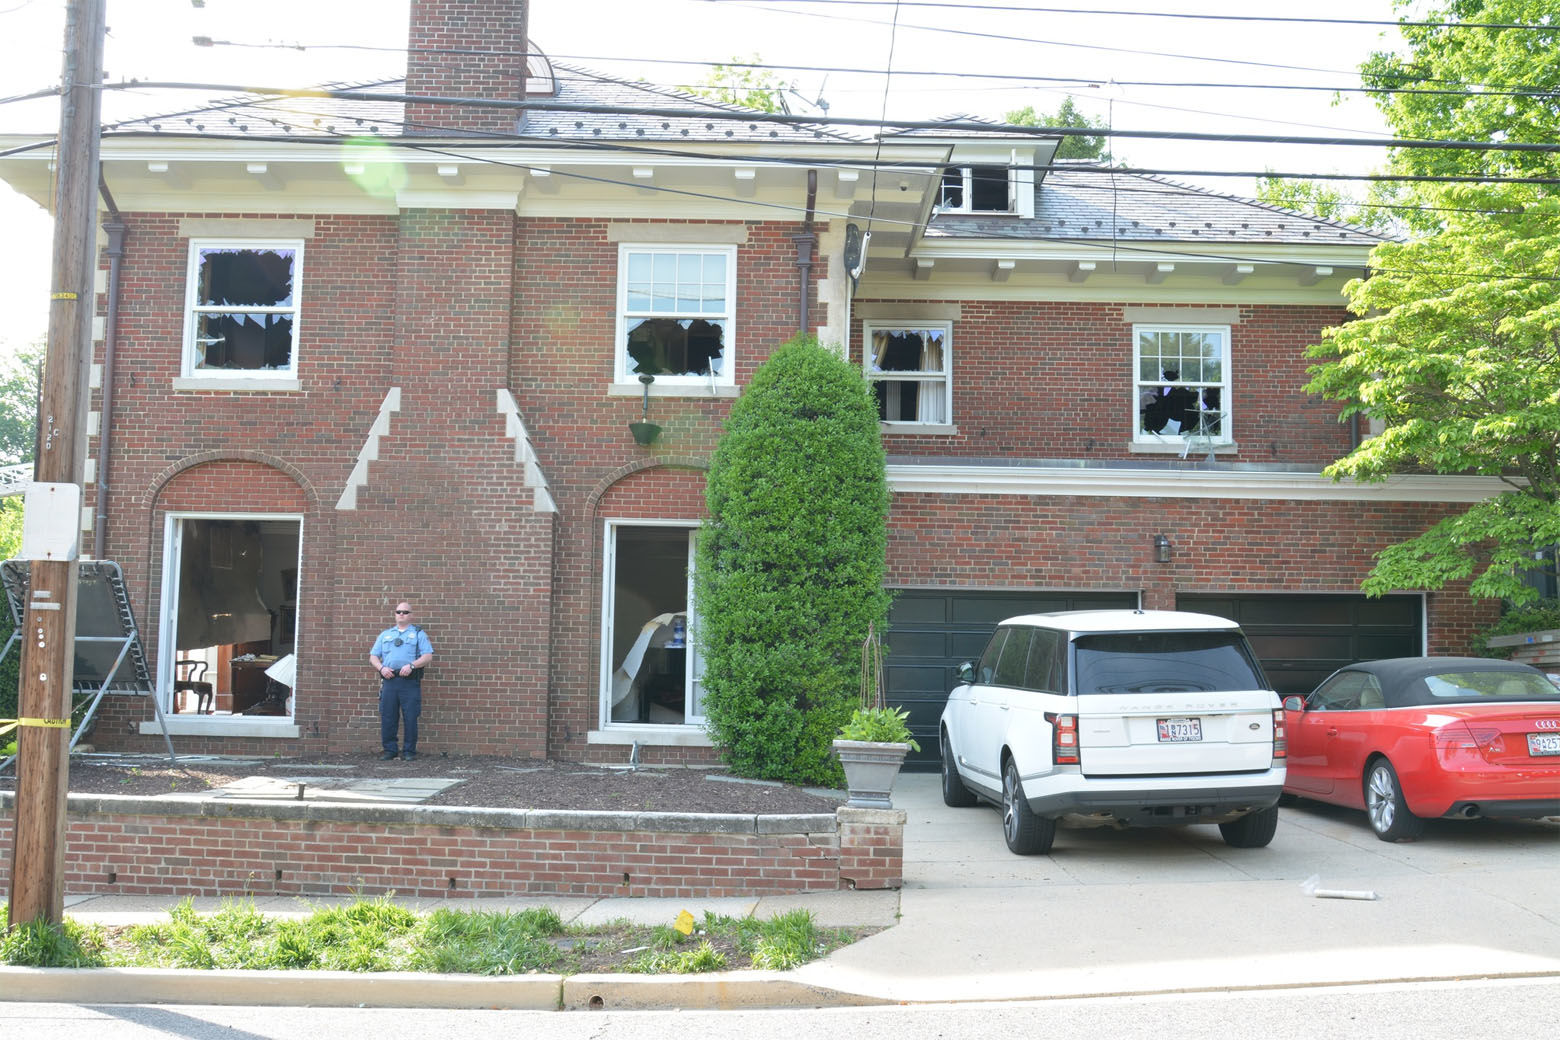 The Savopoulos house is seen in this crime scene photo from D.C. police. Fire officials testified they broke out many of the house's windows to ventilate the fire that raged on the home's second floor. (Courtesy U.S. Attorney's Office for D.C.)